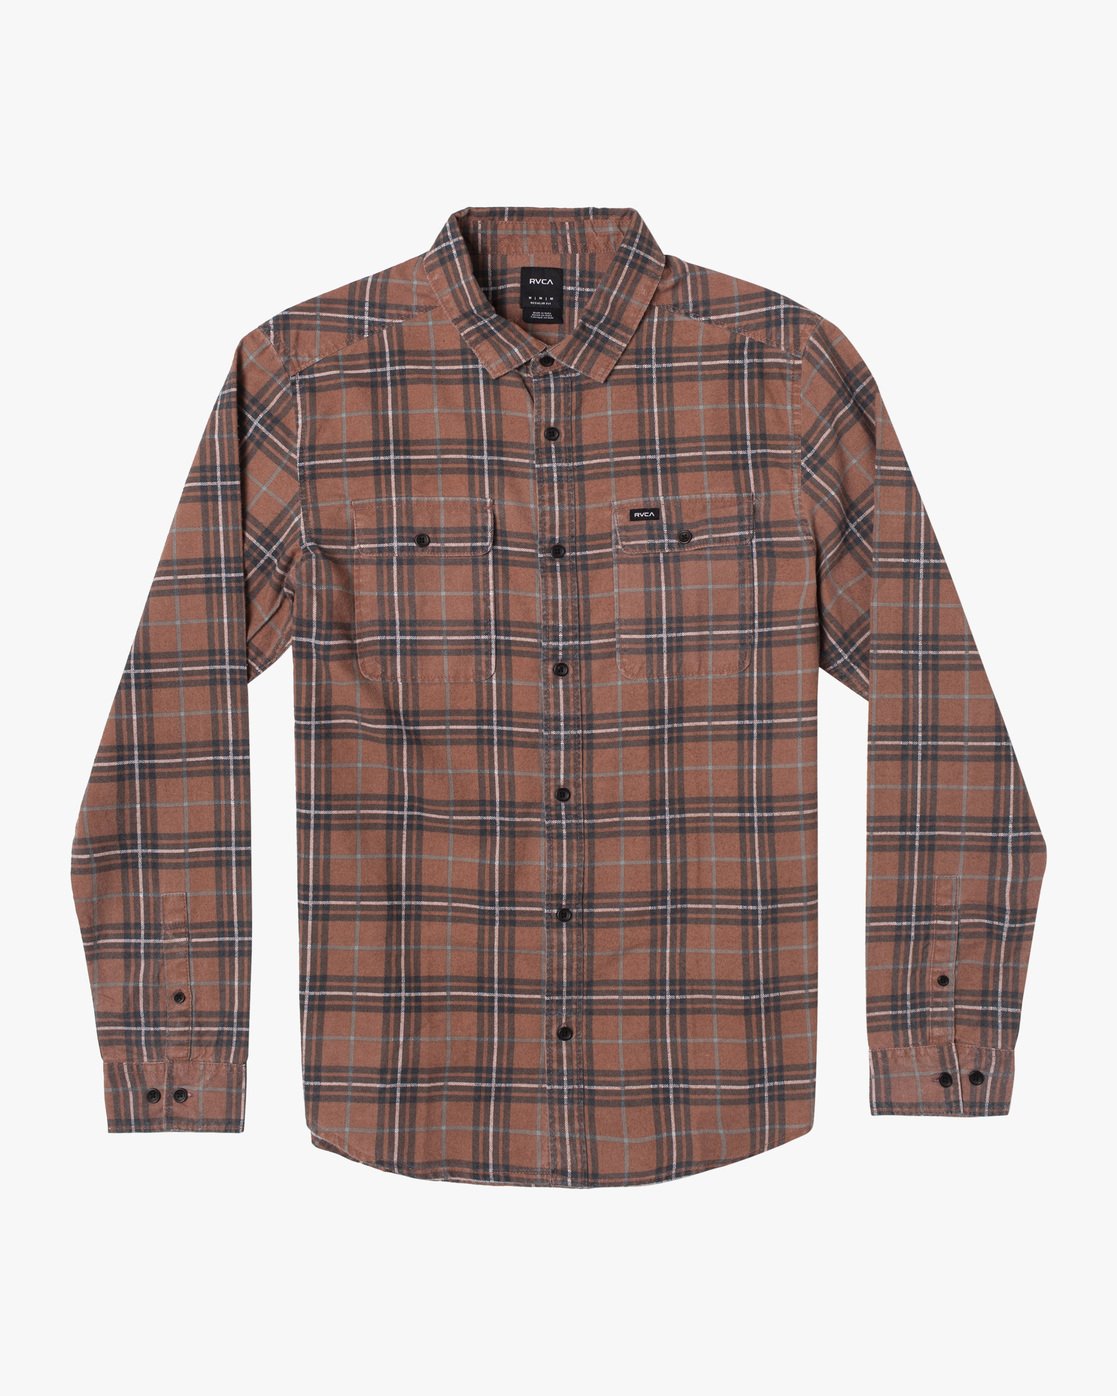 RVCA PANHANDLE LS FLANNEL BRK